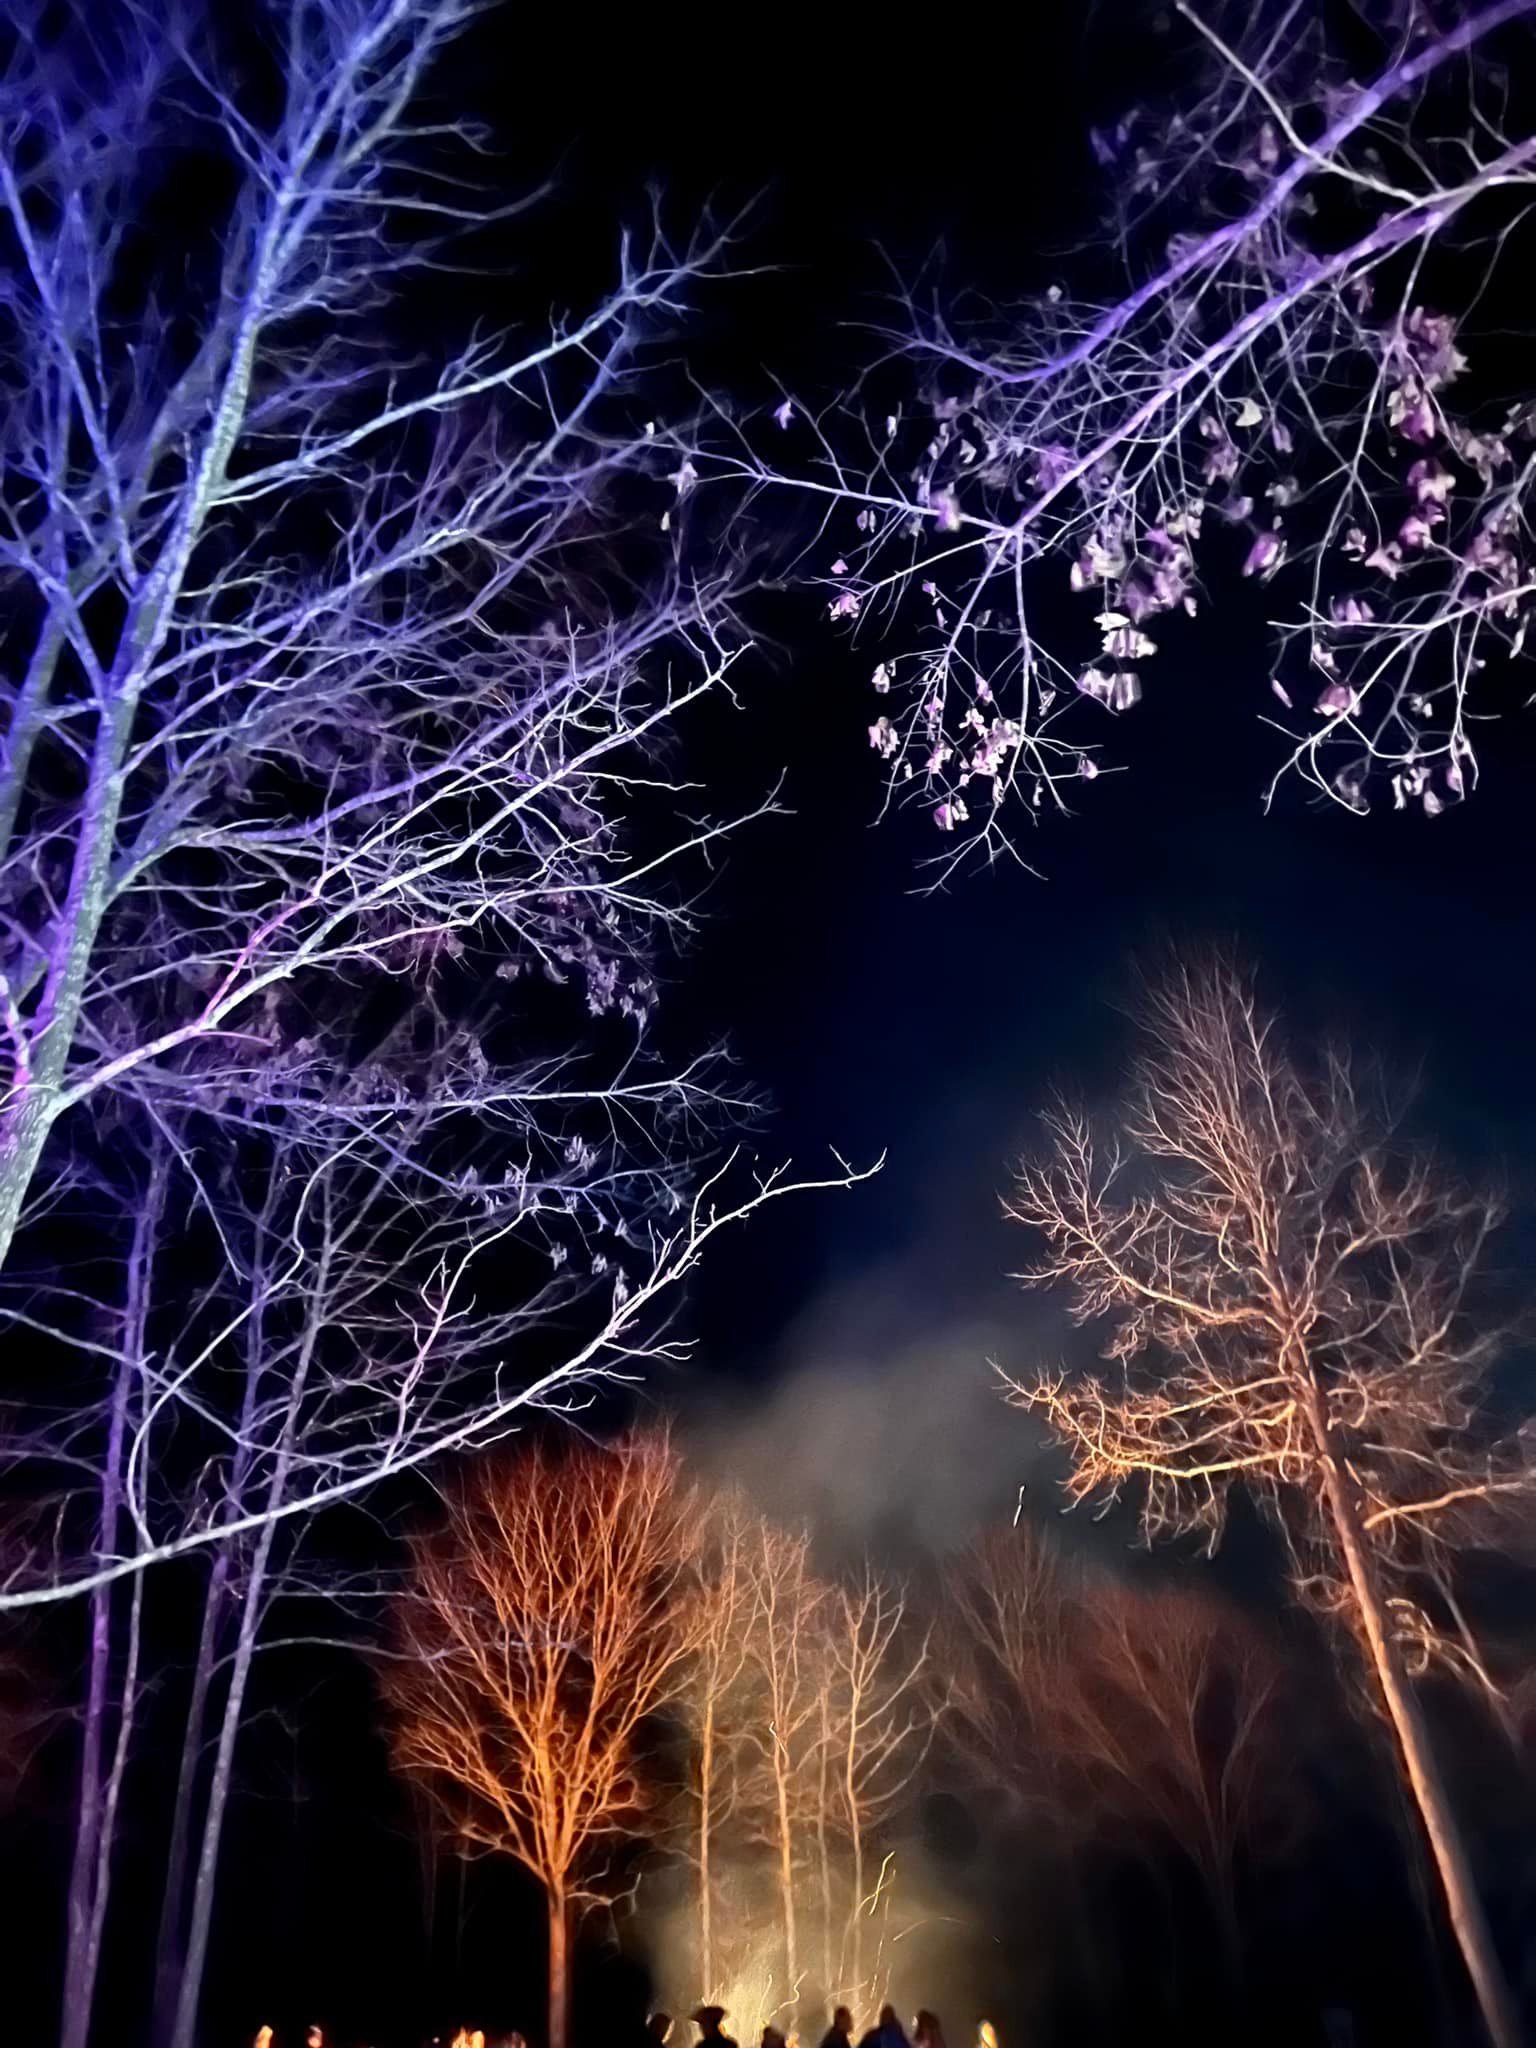 Night view of trees